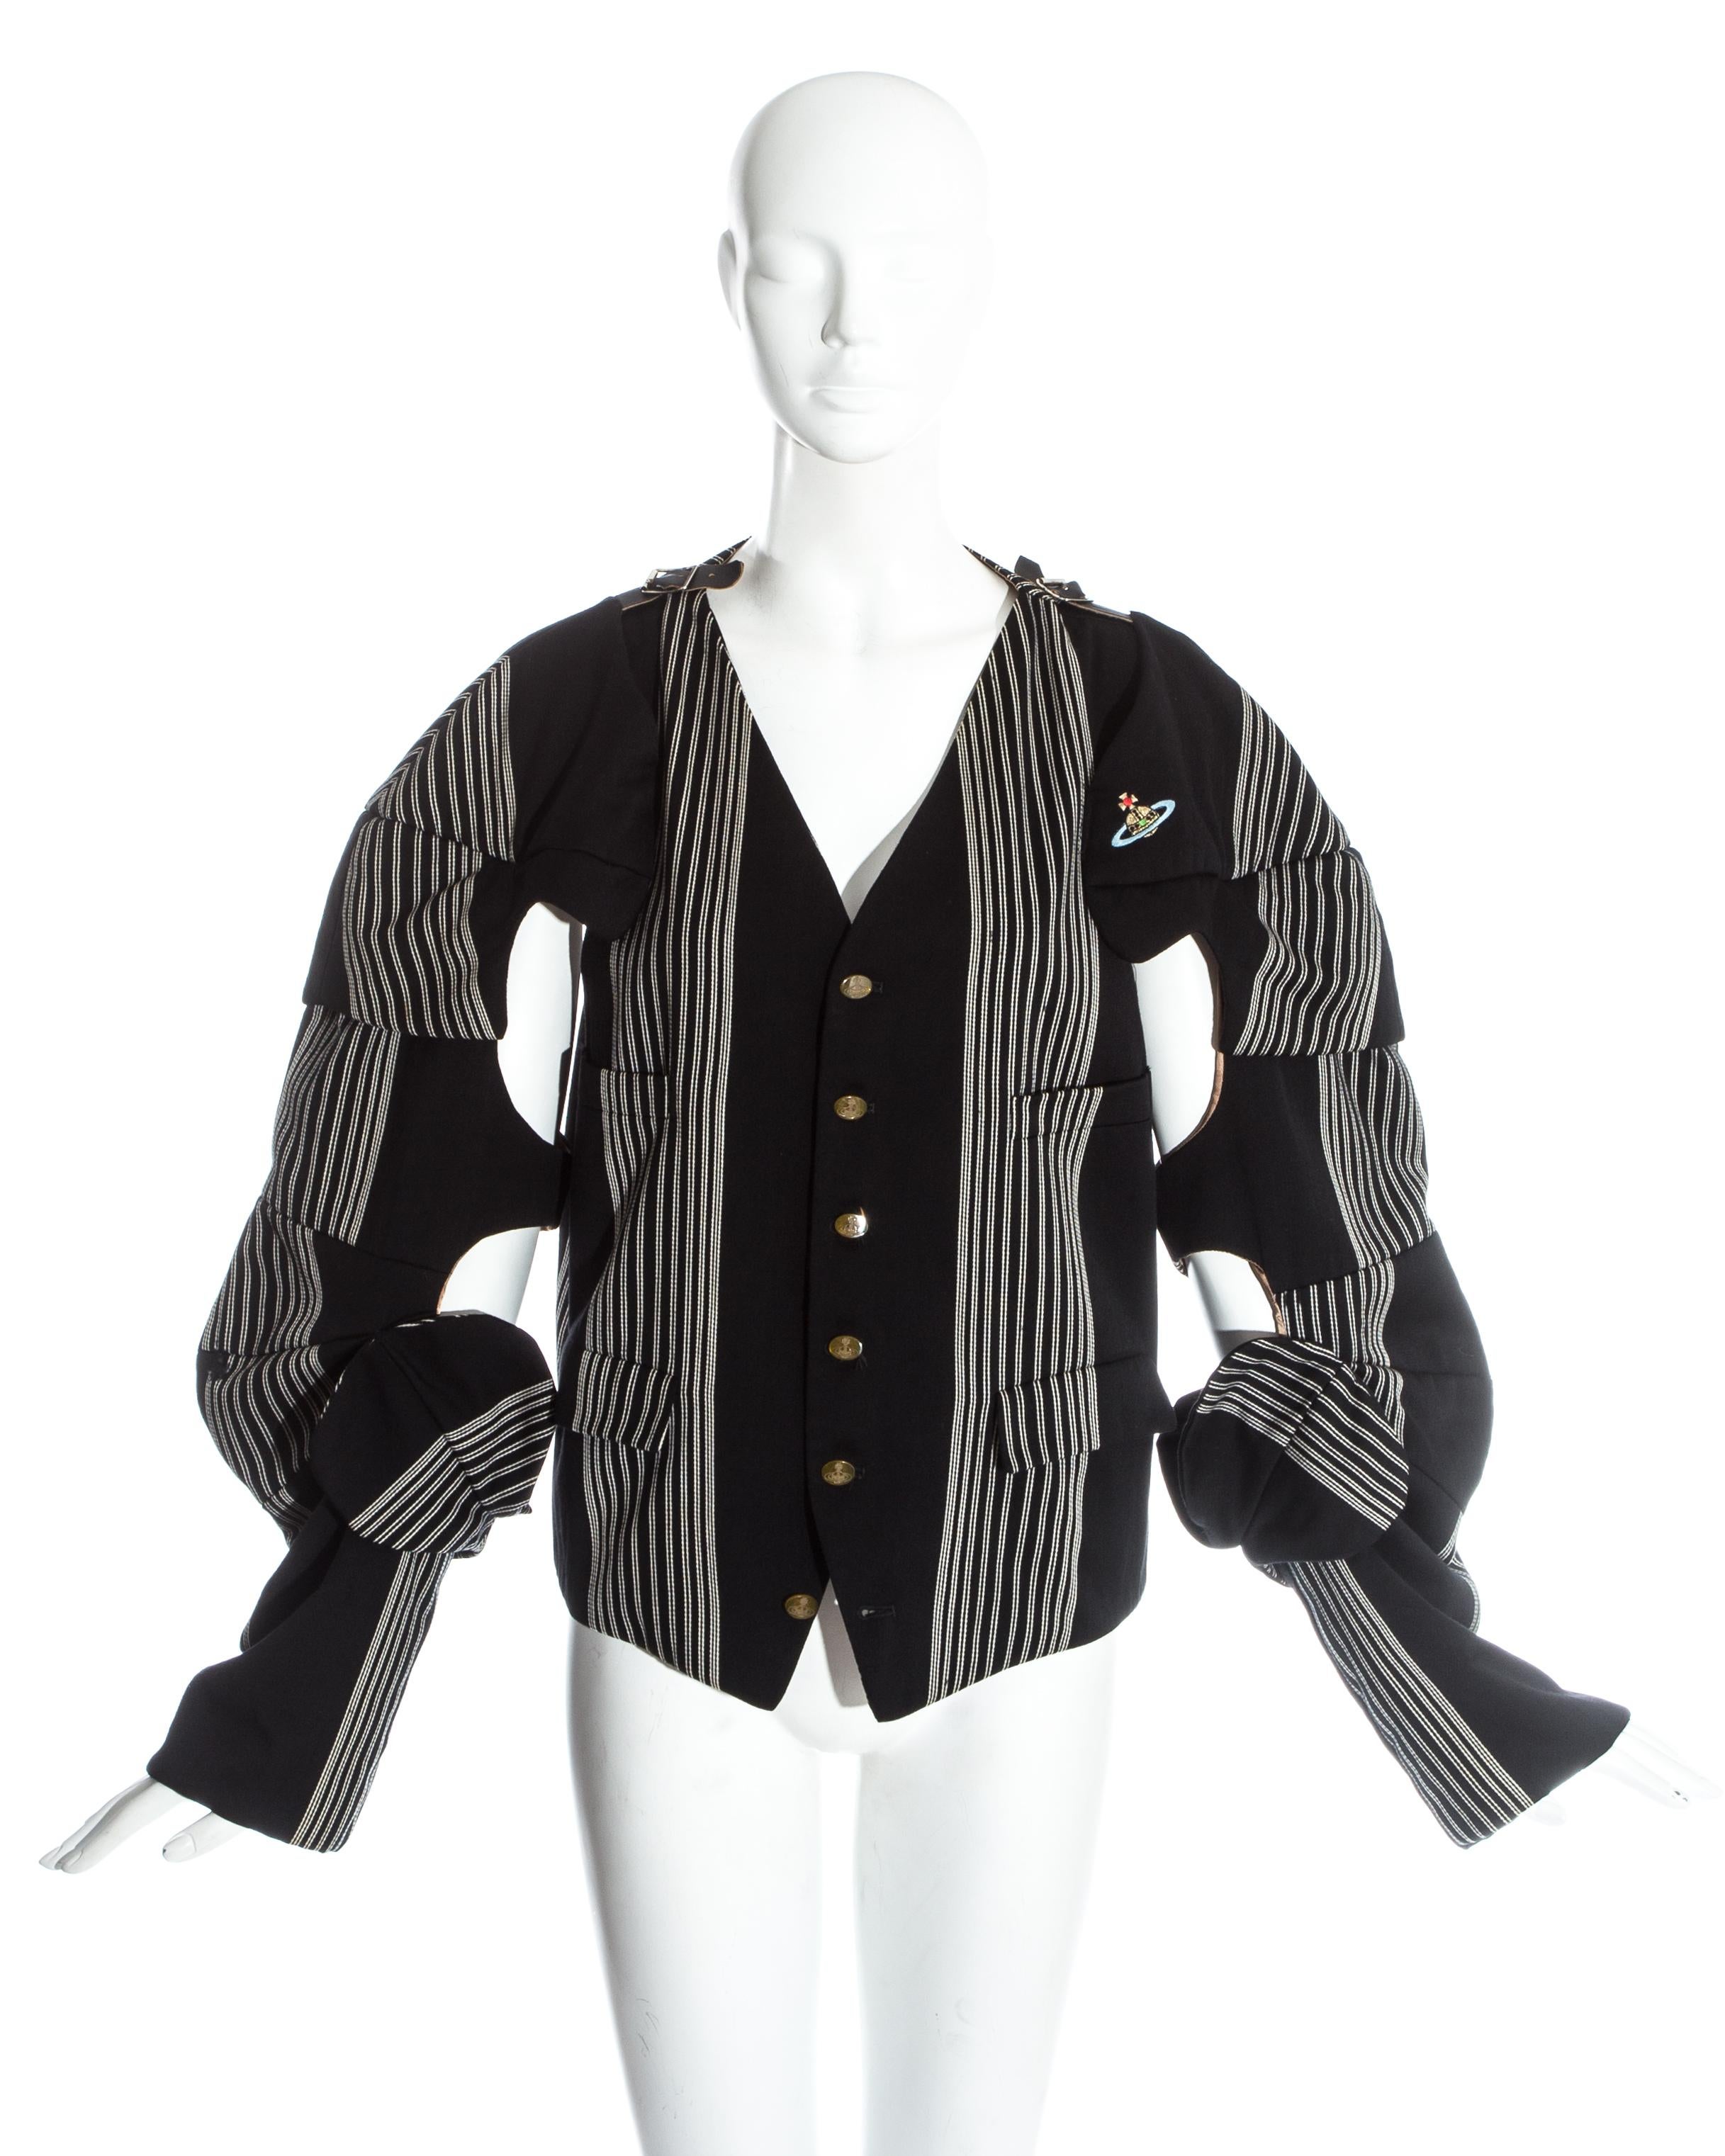 Vivienne Westwood, black and white striped wool Armour Jacket. Detachable sleeves with leather buckles, embroidered Orb on chest and signature Westwood buttons.

Time Machine, Fall-Winter 1989